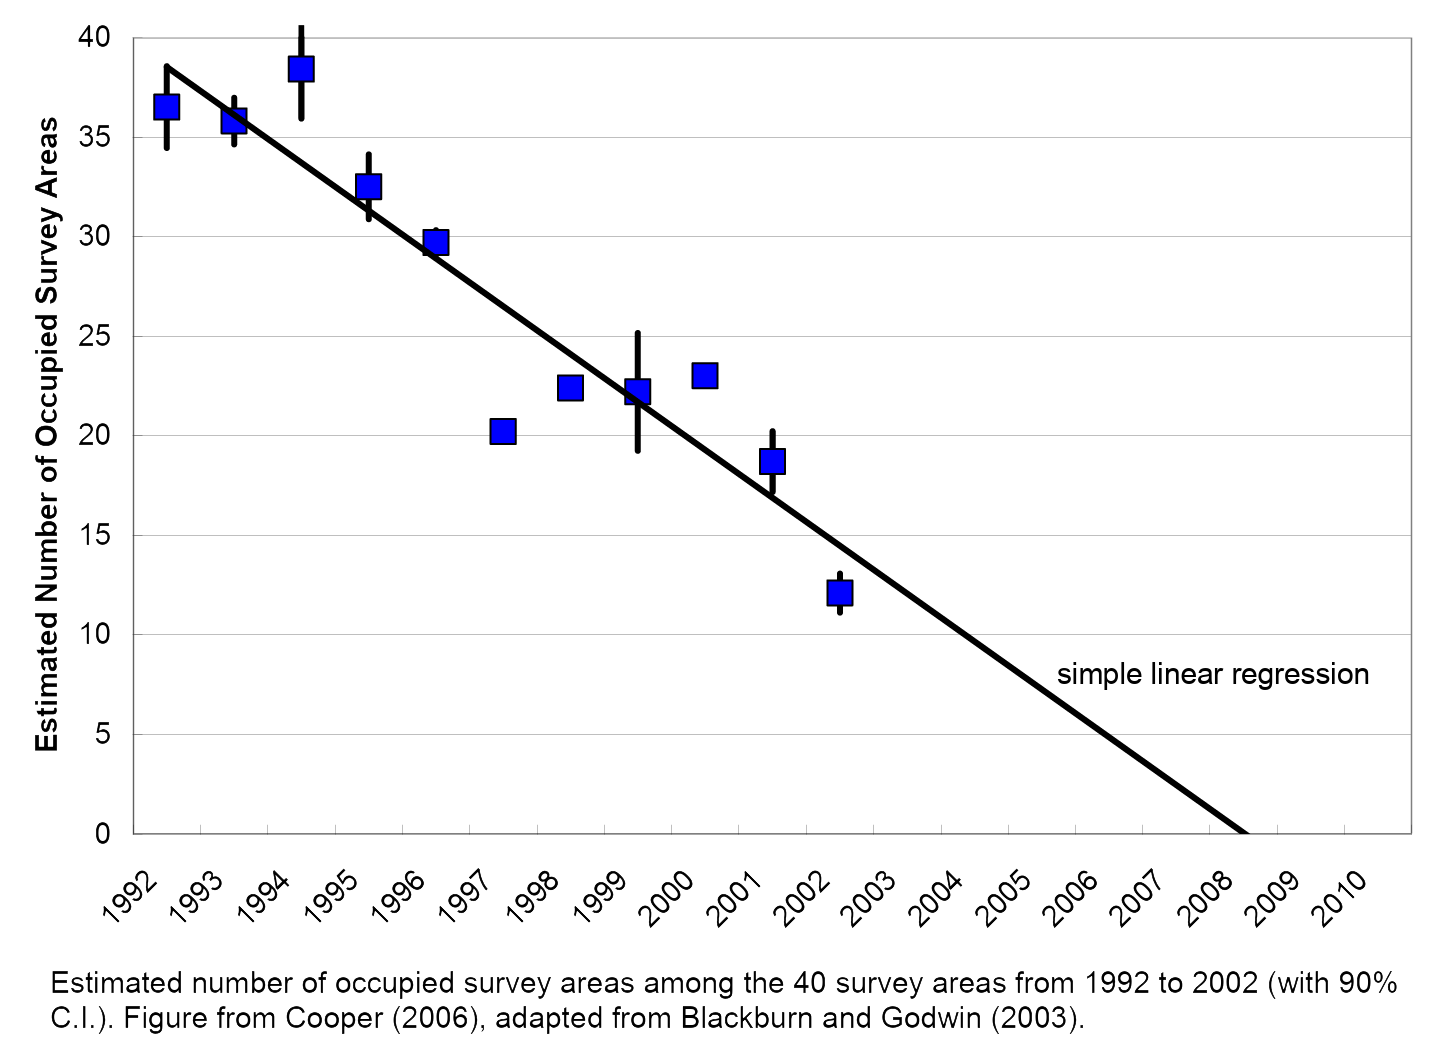 Estimated number of survey areas occupied by Spotted Owls among the 40 survey areas from 1992 to 2002 (with 90 percent C.I.), showing the linear extrapolation to 2008. Figure from Cooper (2006), adapted from Blackburn and Godwin (2003). Graphic: COSEWIC